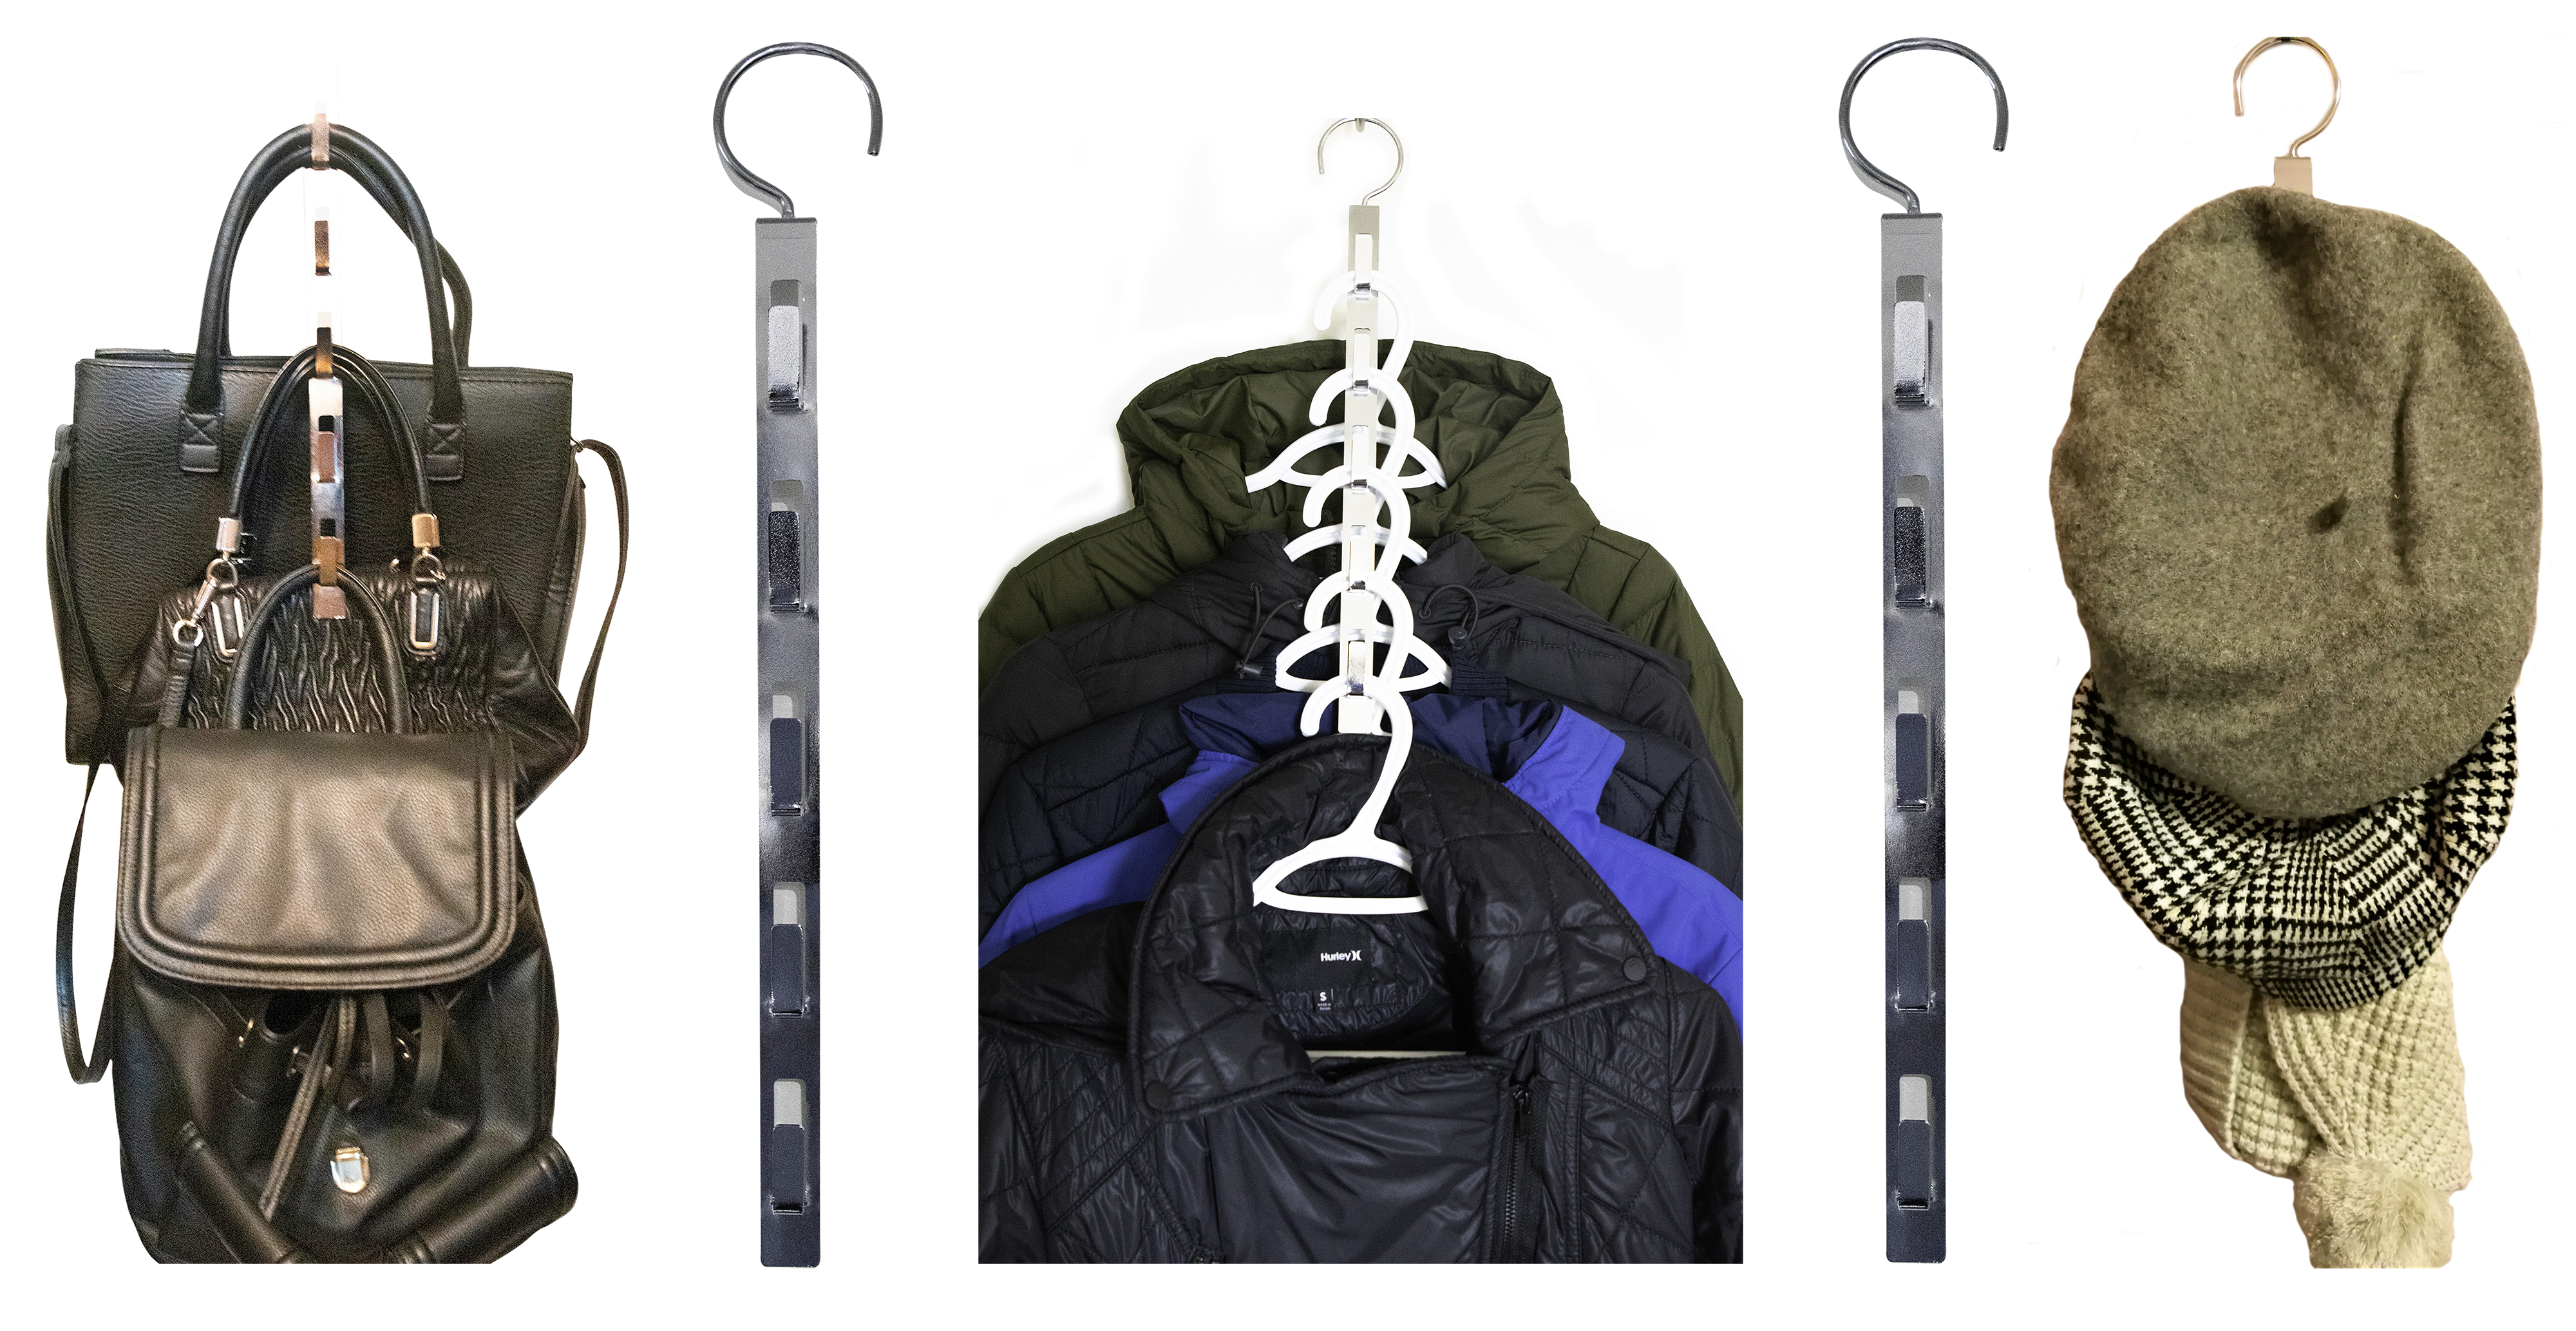 D'klutz multifuntional hanger that hangs bags, winter jackets, winter hats (black and white colors)